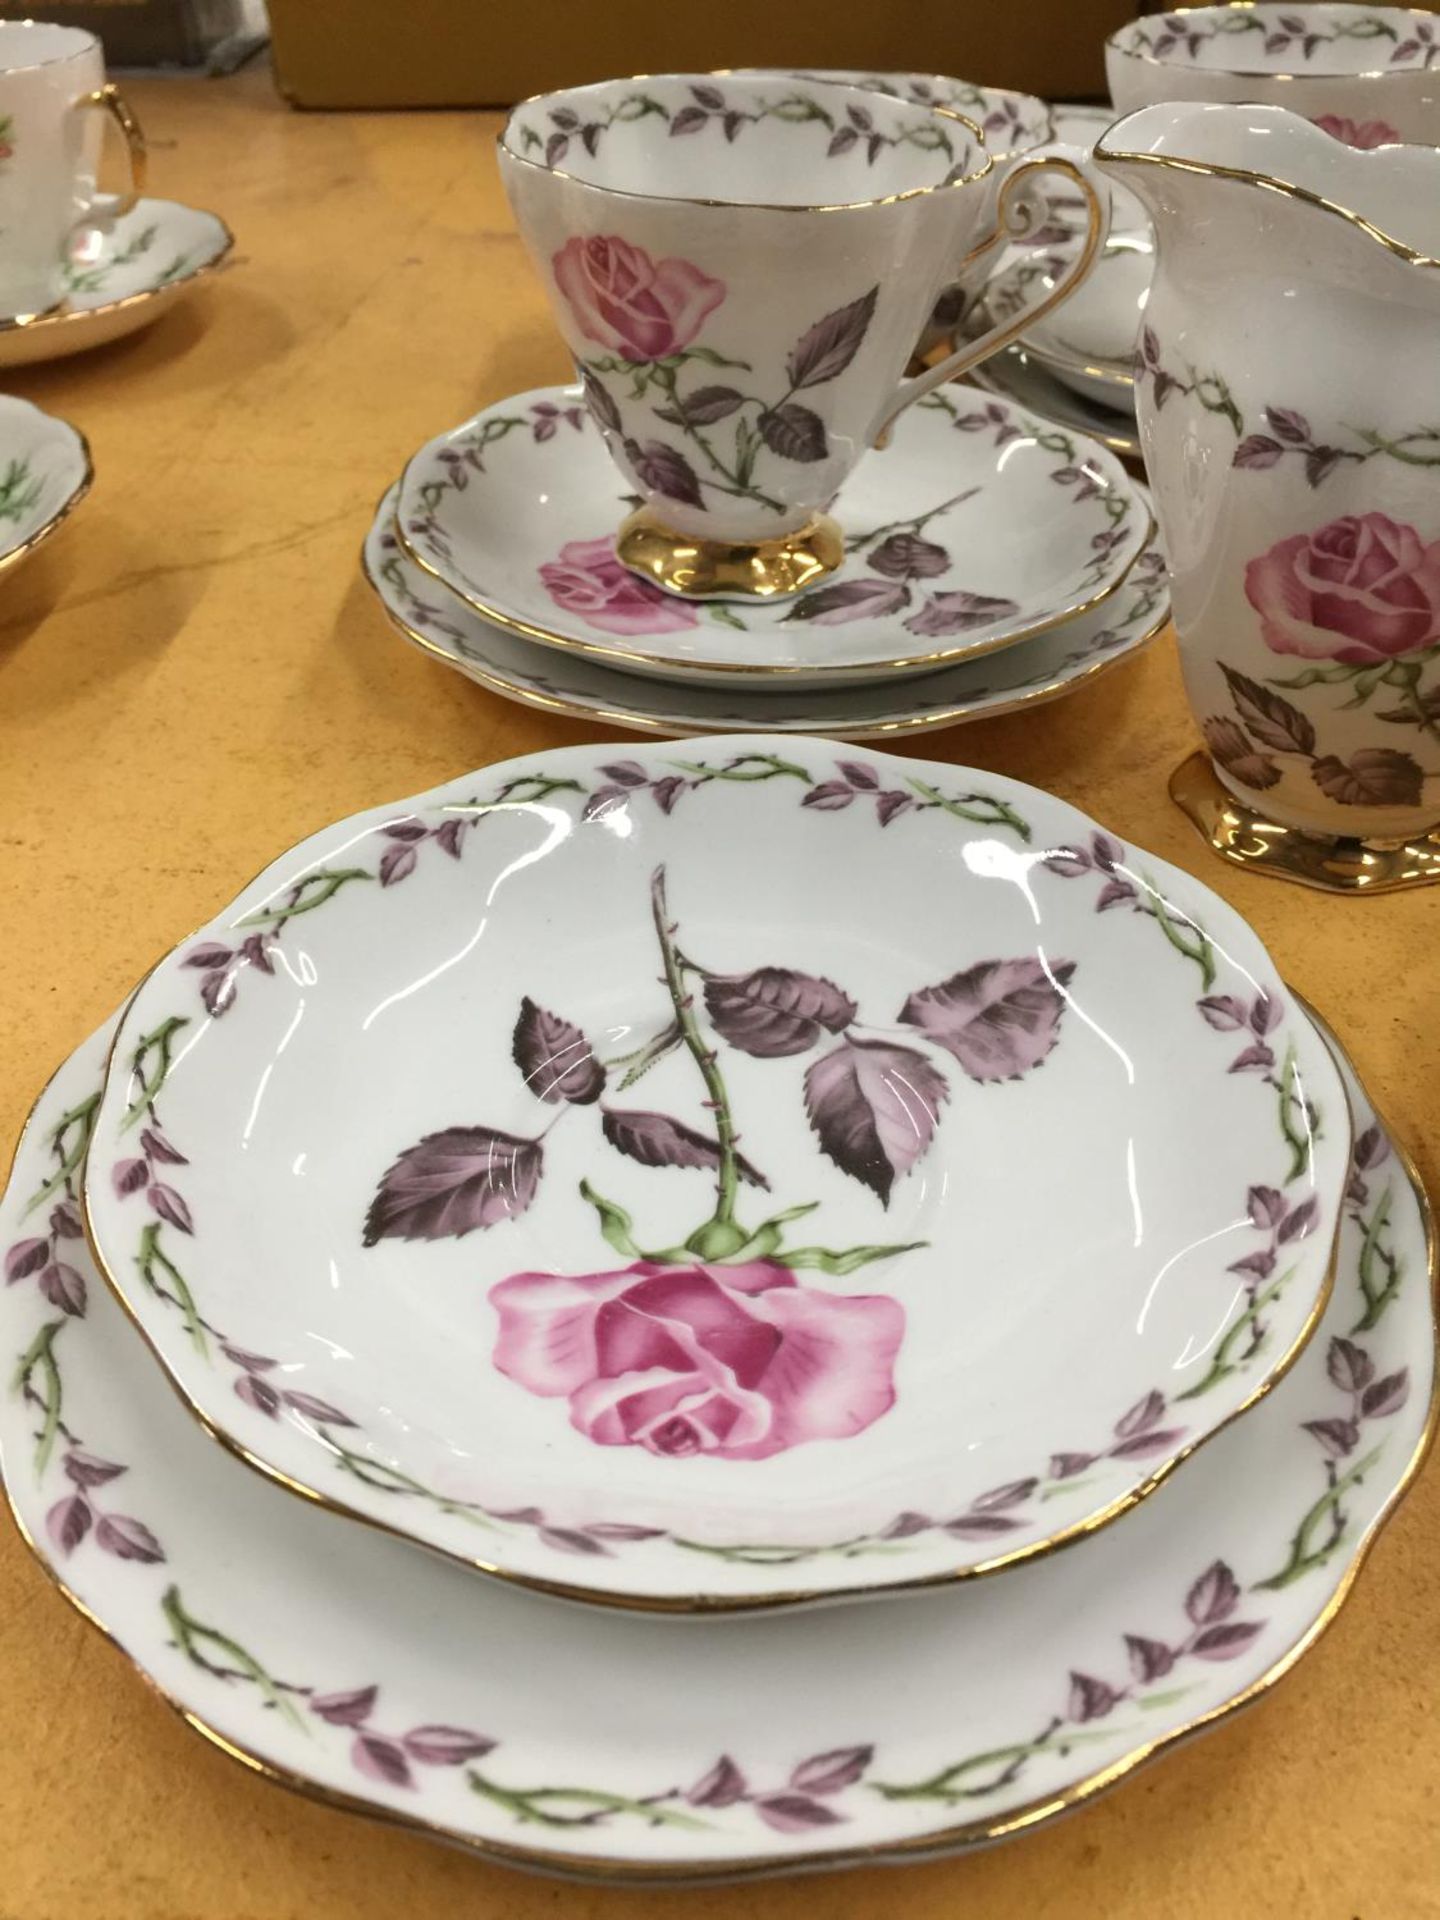 A ROYAL STANDARD 'ROSE MAXI' TEASET TO INCLUDE A CAKE PLATE, CREAM JUG, SUGAR BOWL, FIVE CUPS, - Image 3 of 4